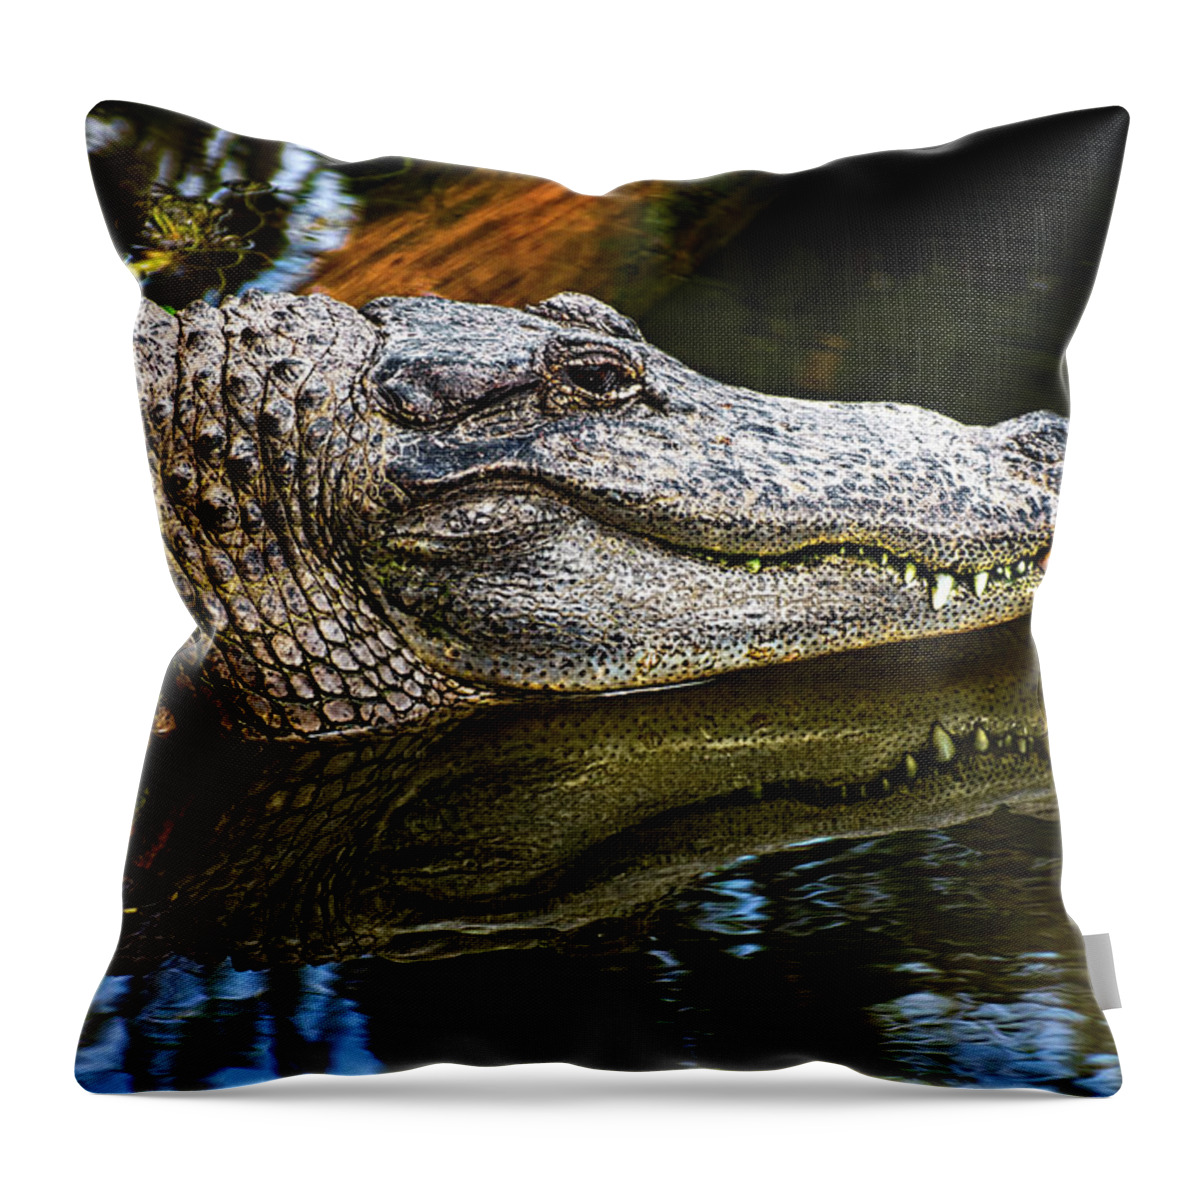 Alligator Throw Pillow featuring the photograph Lump On A Log by Christopher Holmes